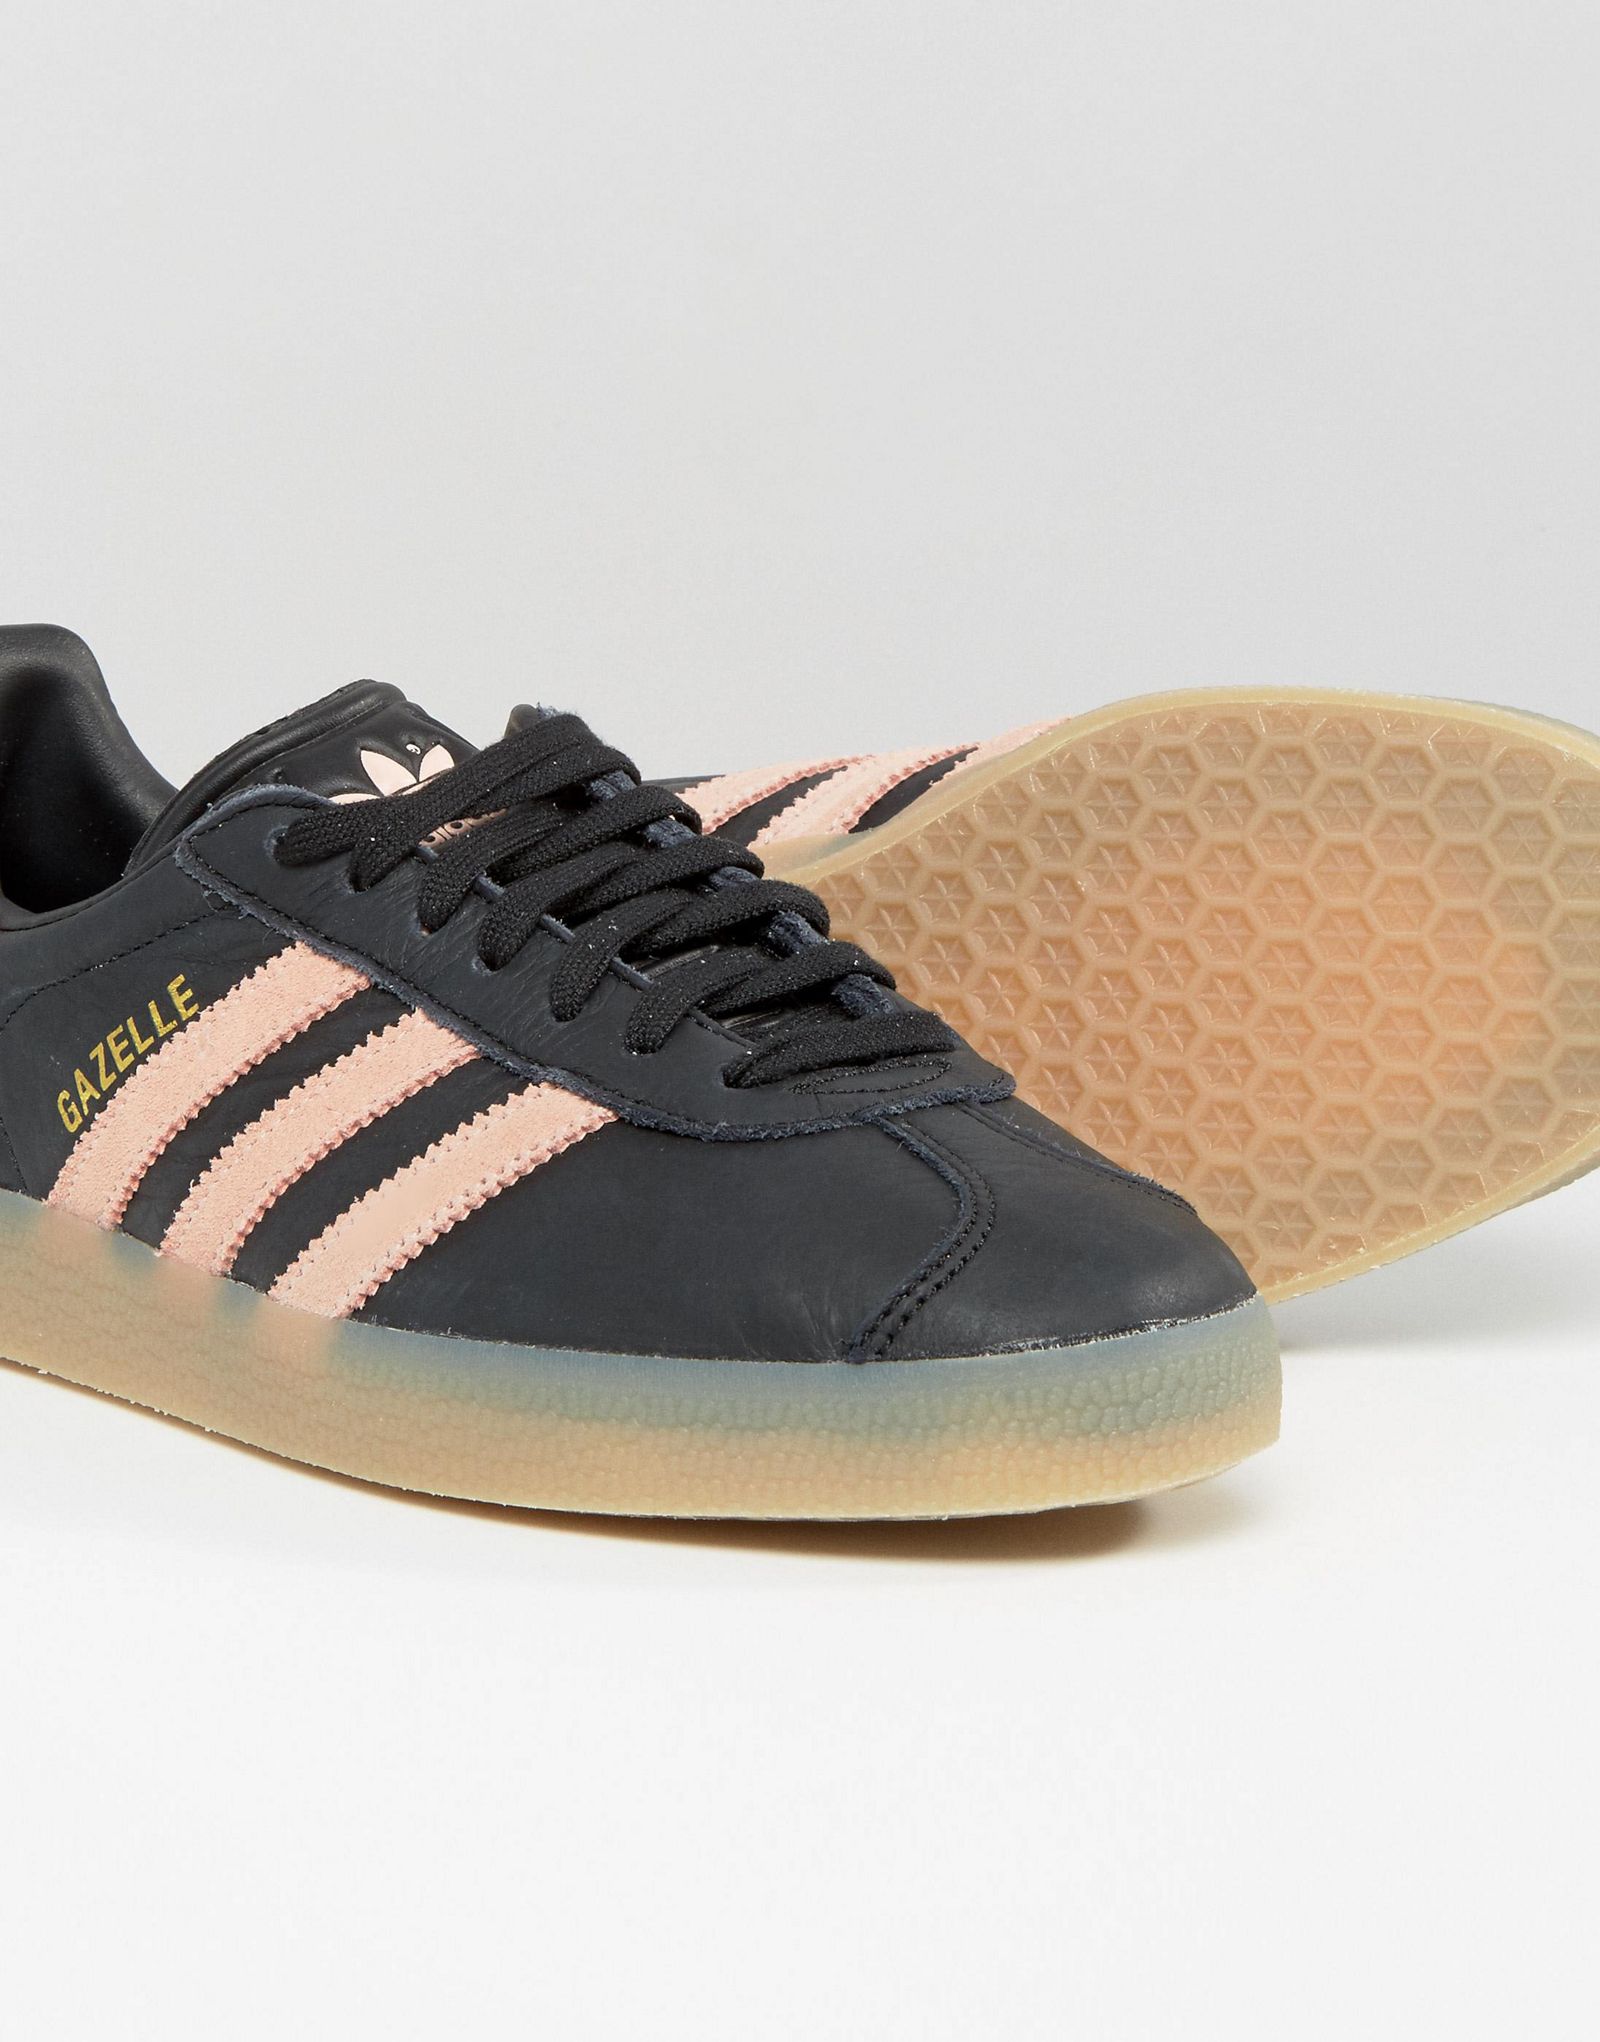 adidas Originals Black And Pink Gazelle Sneakers With Gum Sole